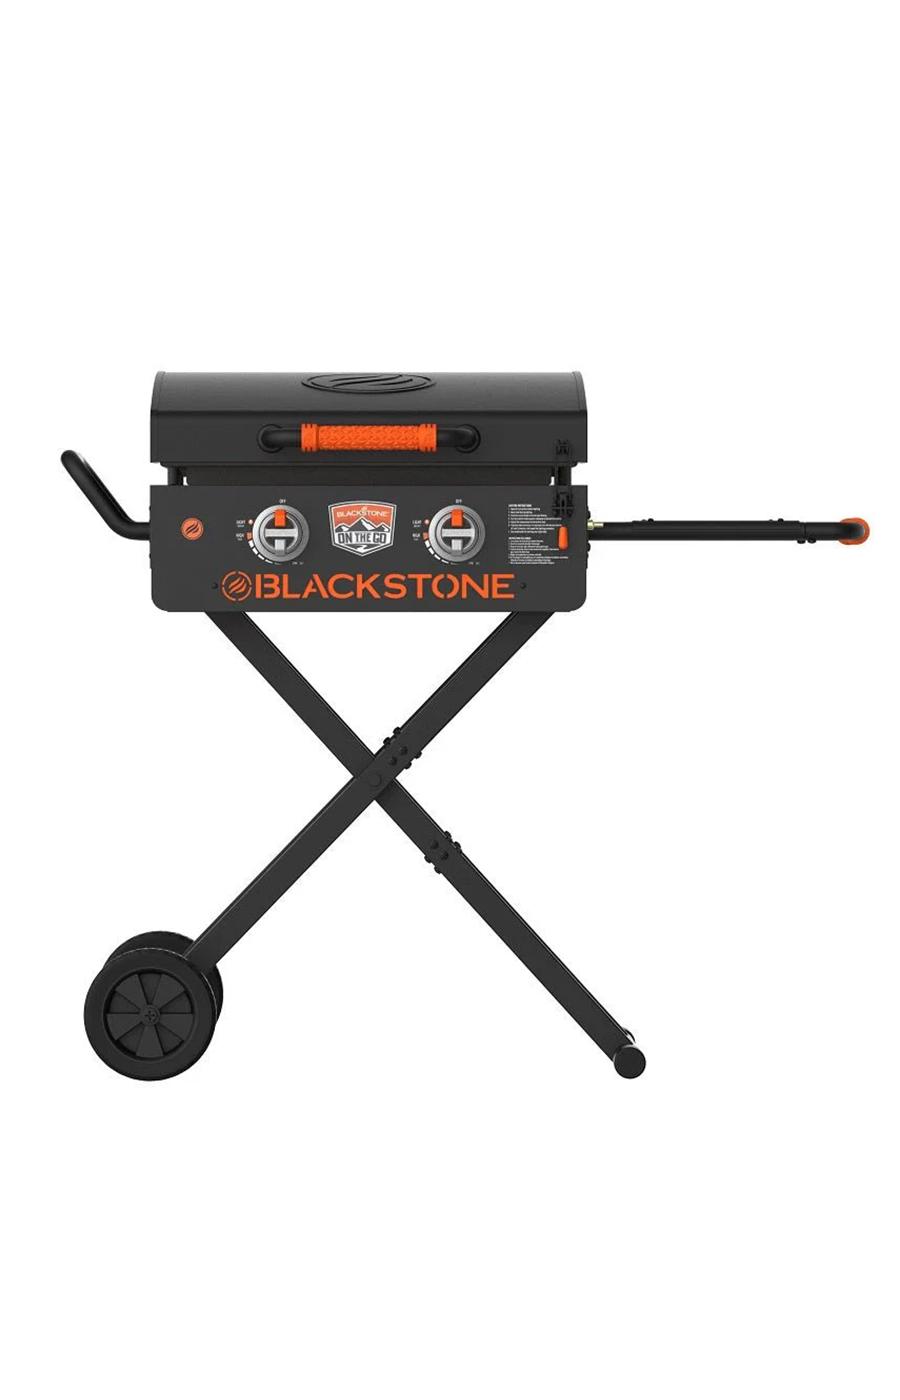 Blackstone  On-the-Go Scissor-Leg Griddle with Hood; image 1 of 6